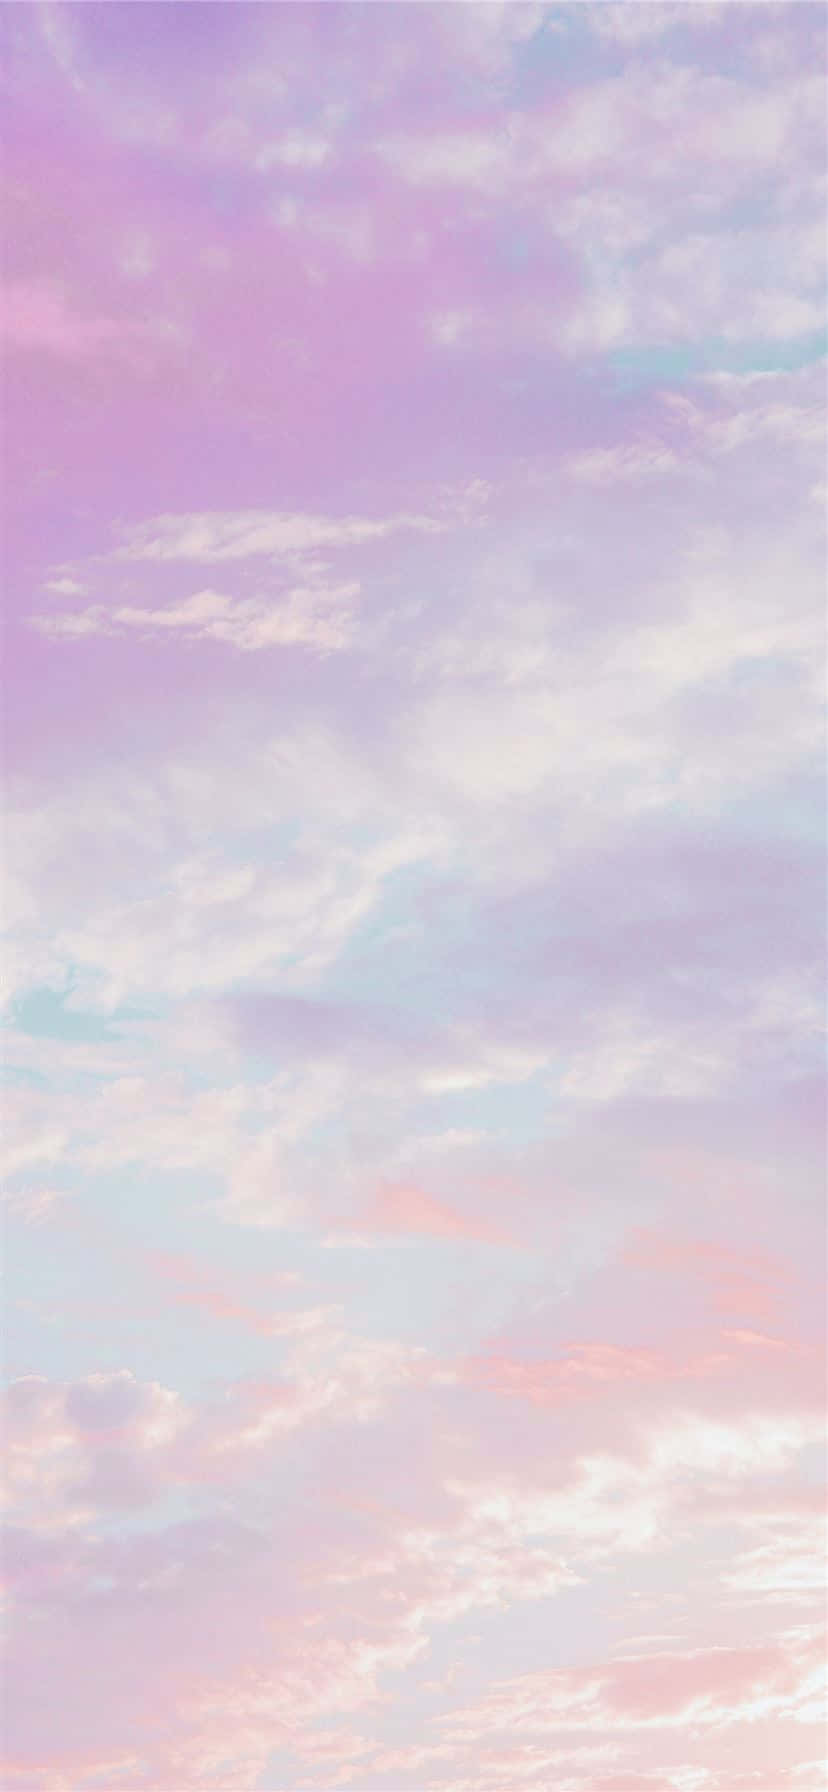 "Surreal Sunrise — A Colorful Display of Pink and Blue Clouds in the Morning Sky" Wallpaper